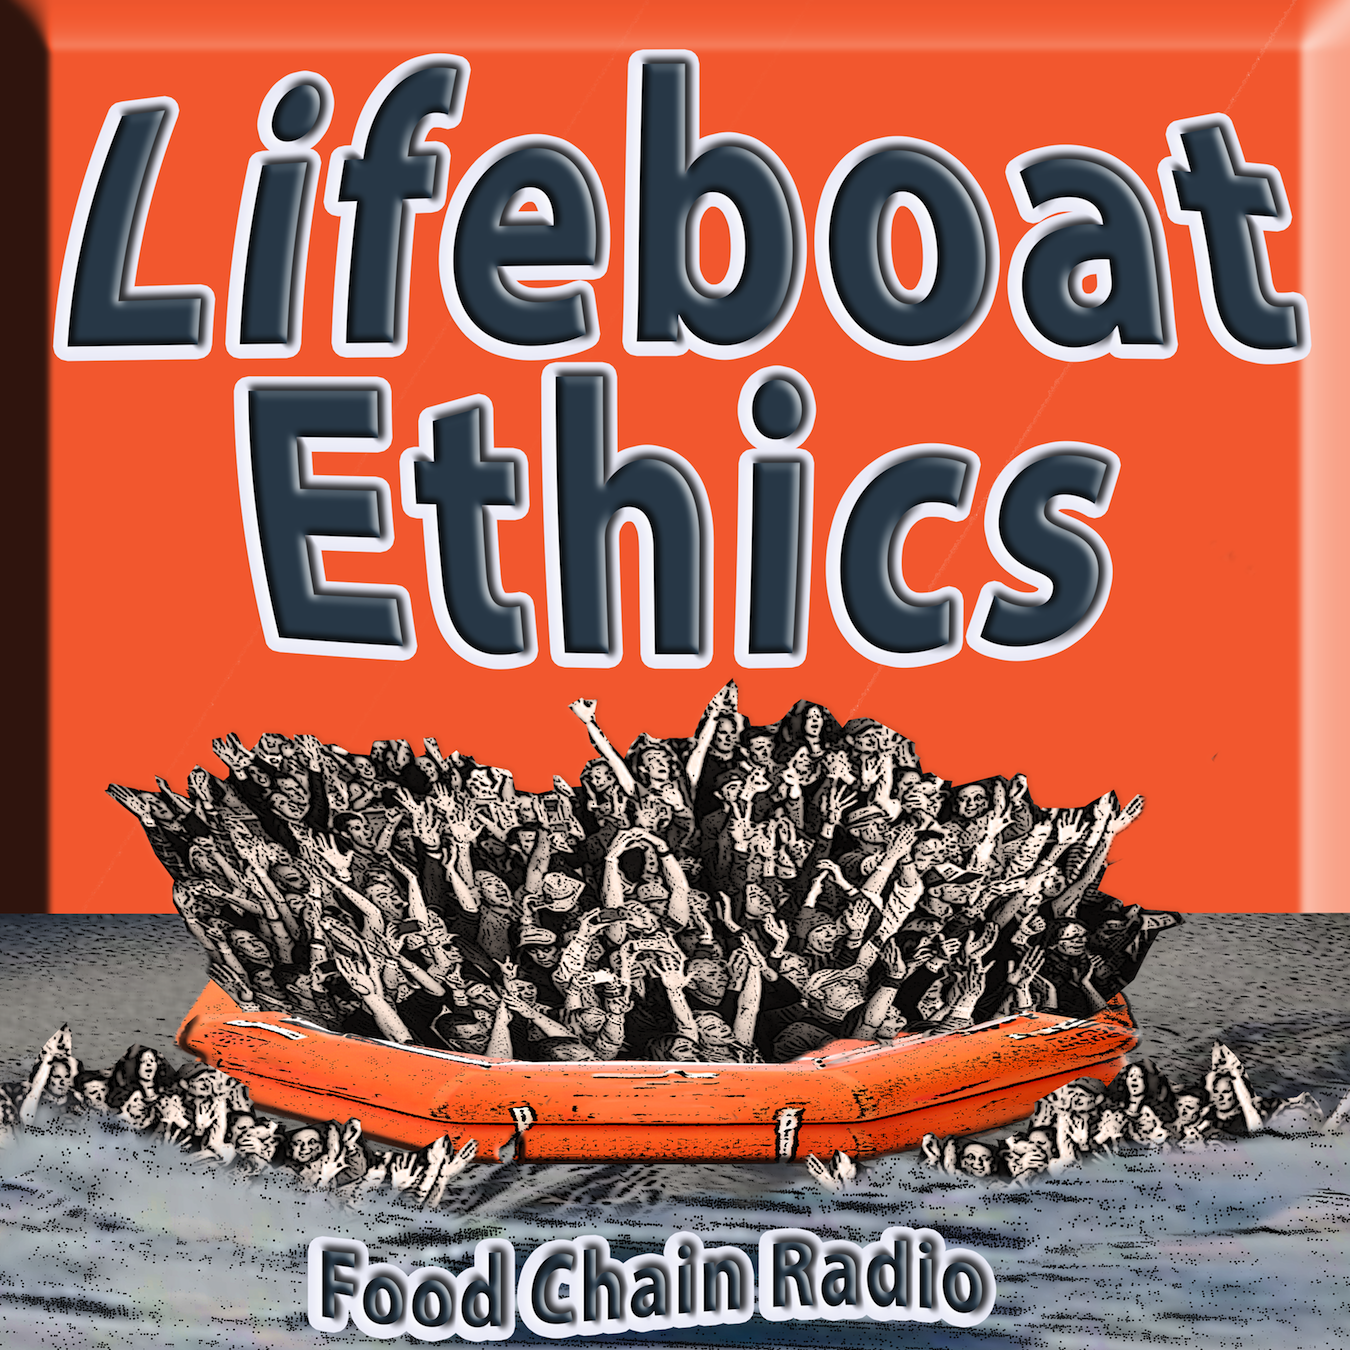 Michael Olson Food Chain Radio – Lifeboat Ethics – Can we allow everyone into lifeboat USA?